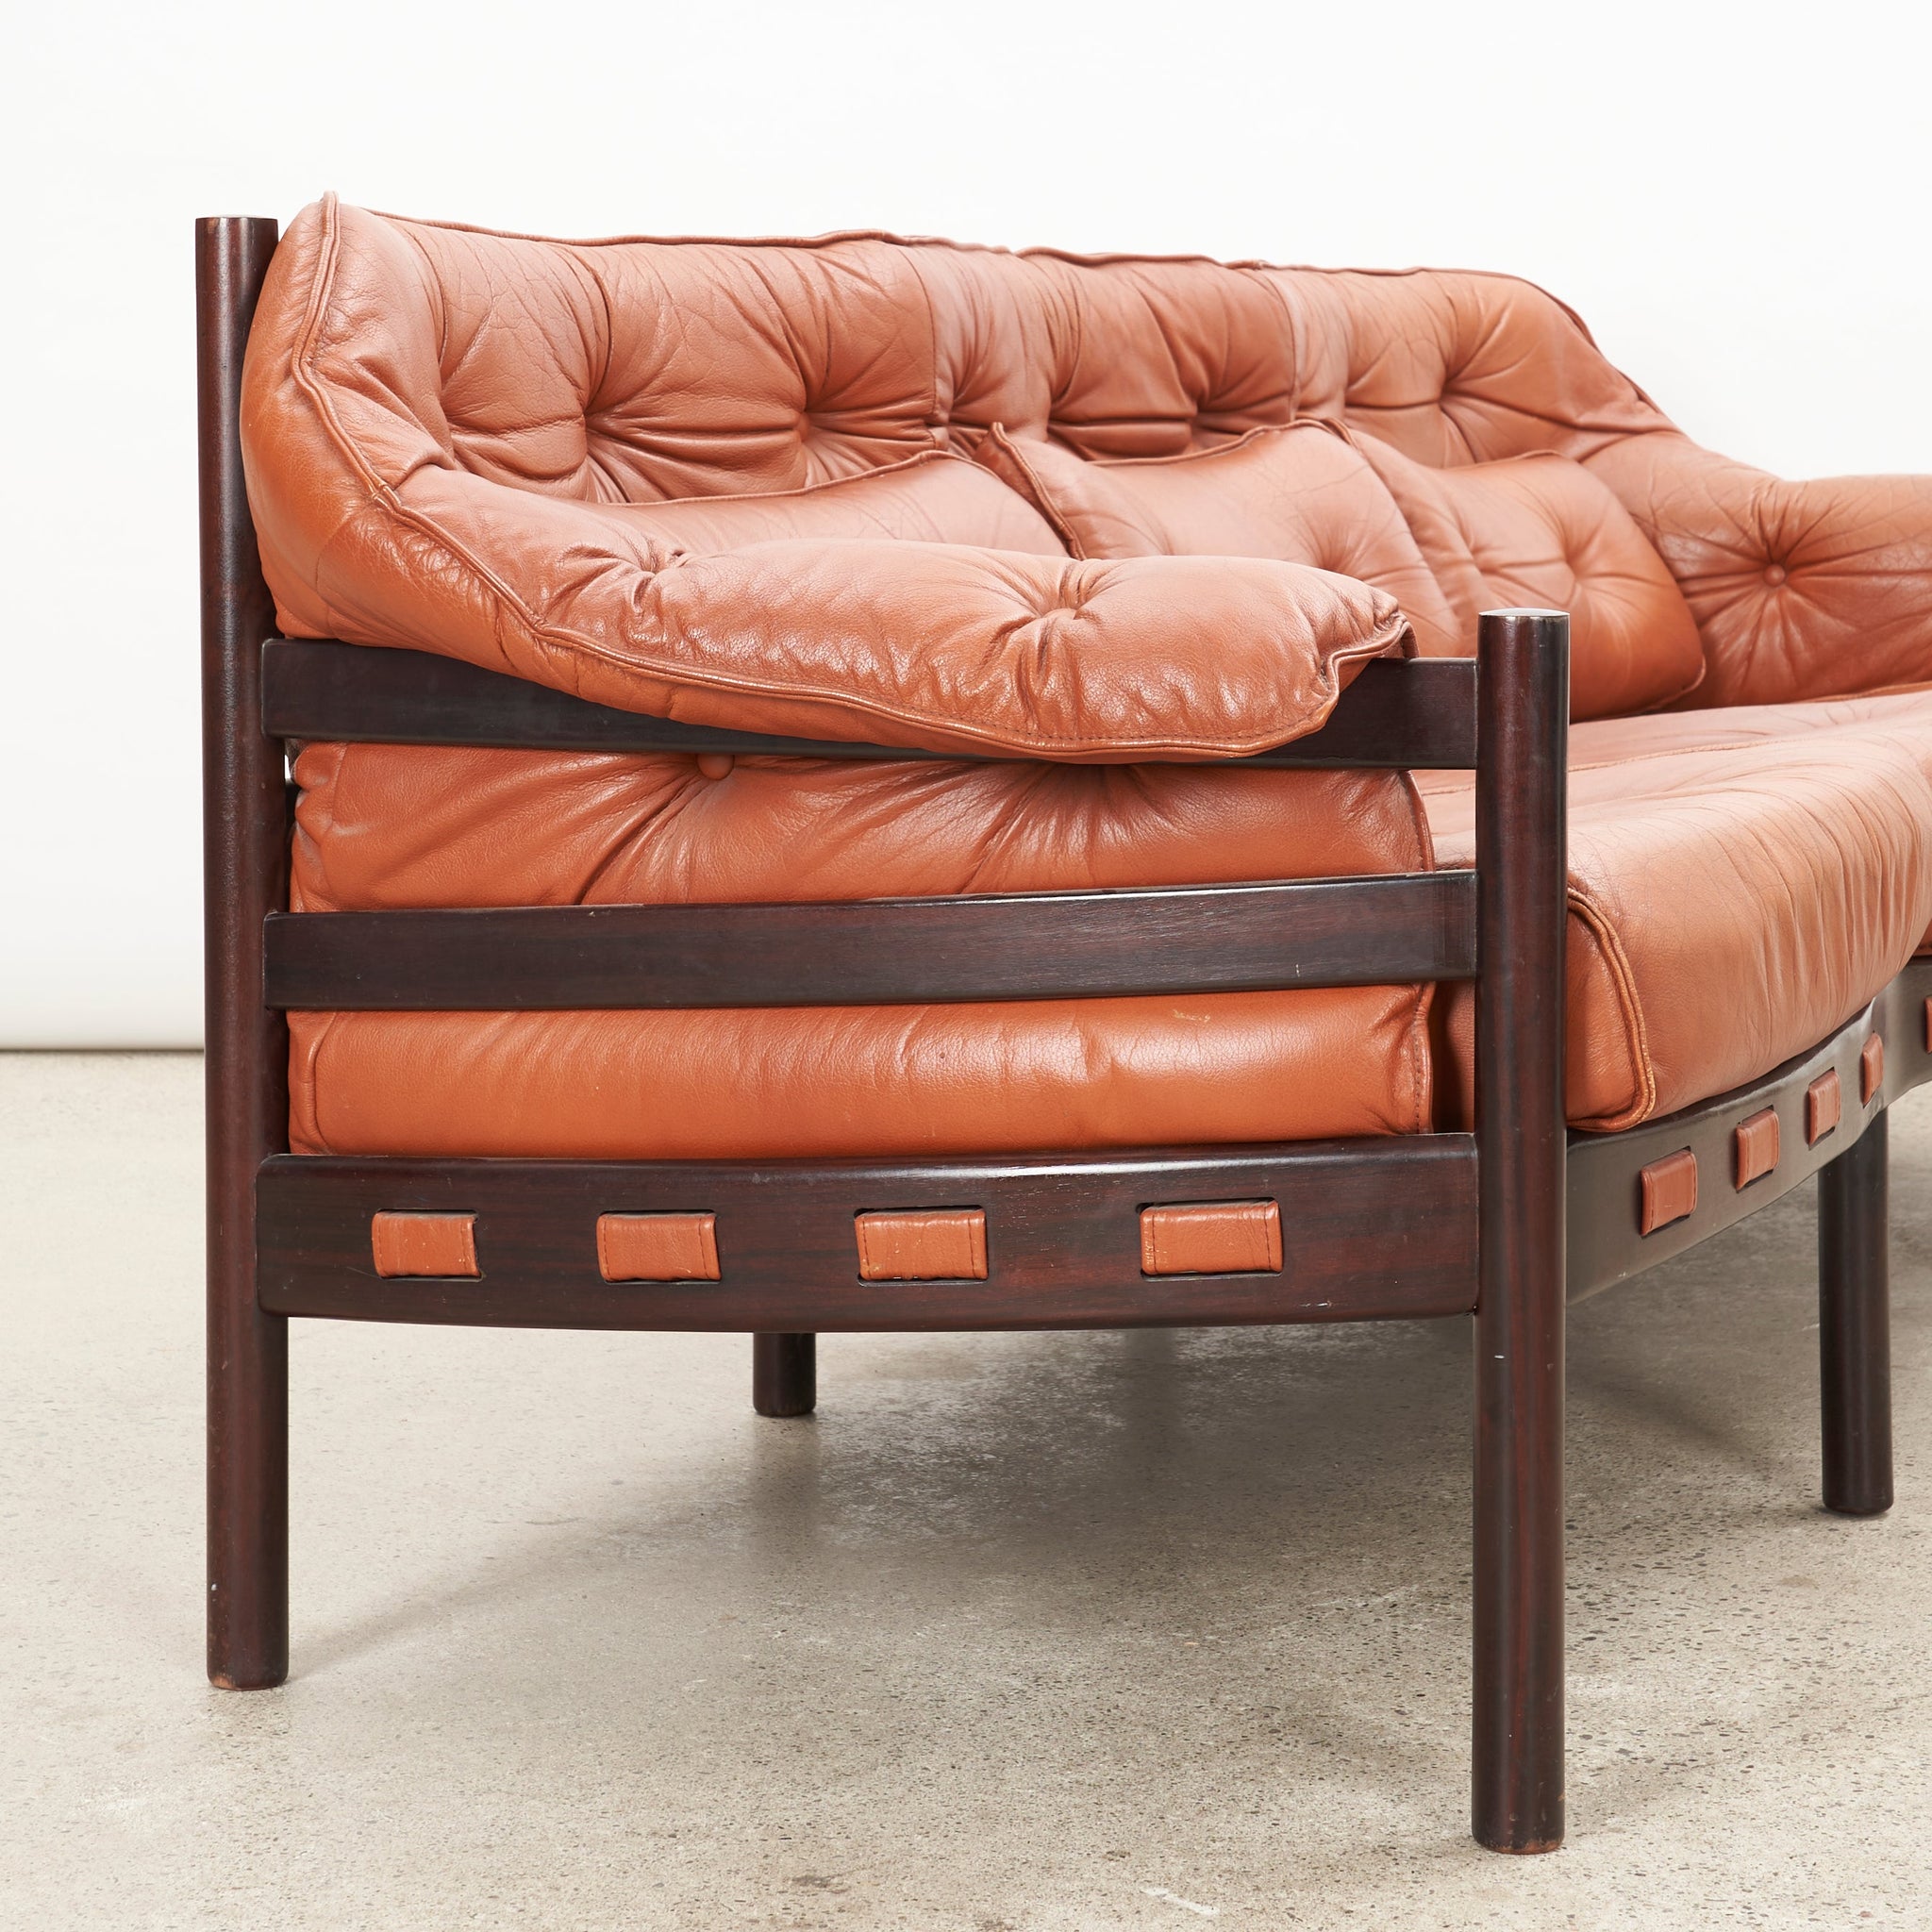 Leather 3 Seater Sofa by Sven Ellekaer for Coja